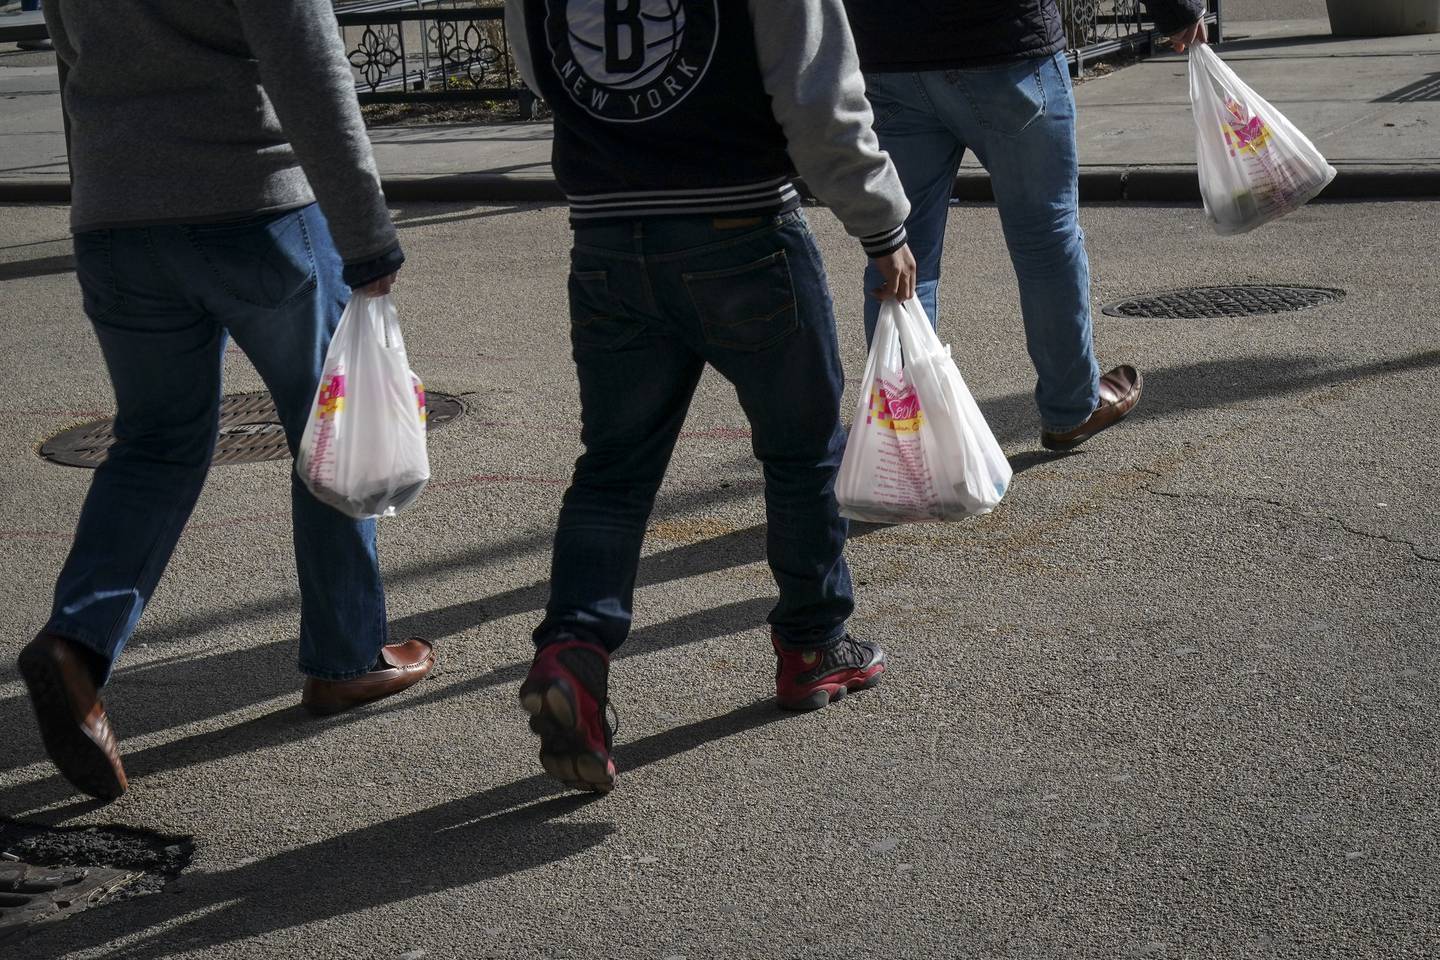 NEW YORK, NY - JANUARY 15: People carry plastic bags during the lunch hour in Lower Manhattan, January 15, 2019 in New York City. New York Governor Andrew Cuomo is planning to push for a statewide ban on single-use plastic shopping bags as part of his 2019 budget, which he is scheduled to introduce in Albany on Tuesday.